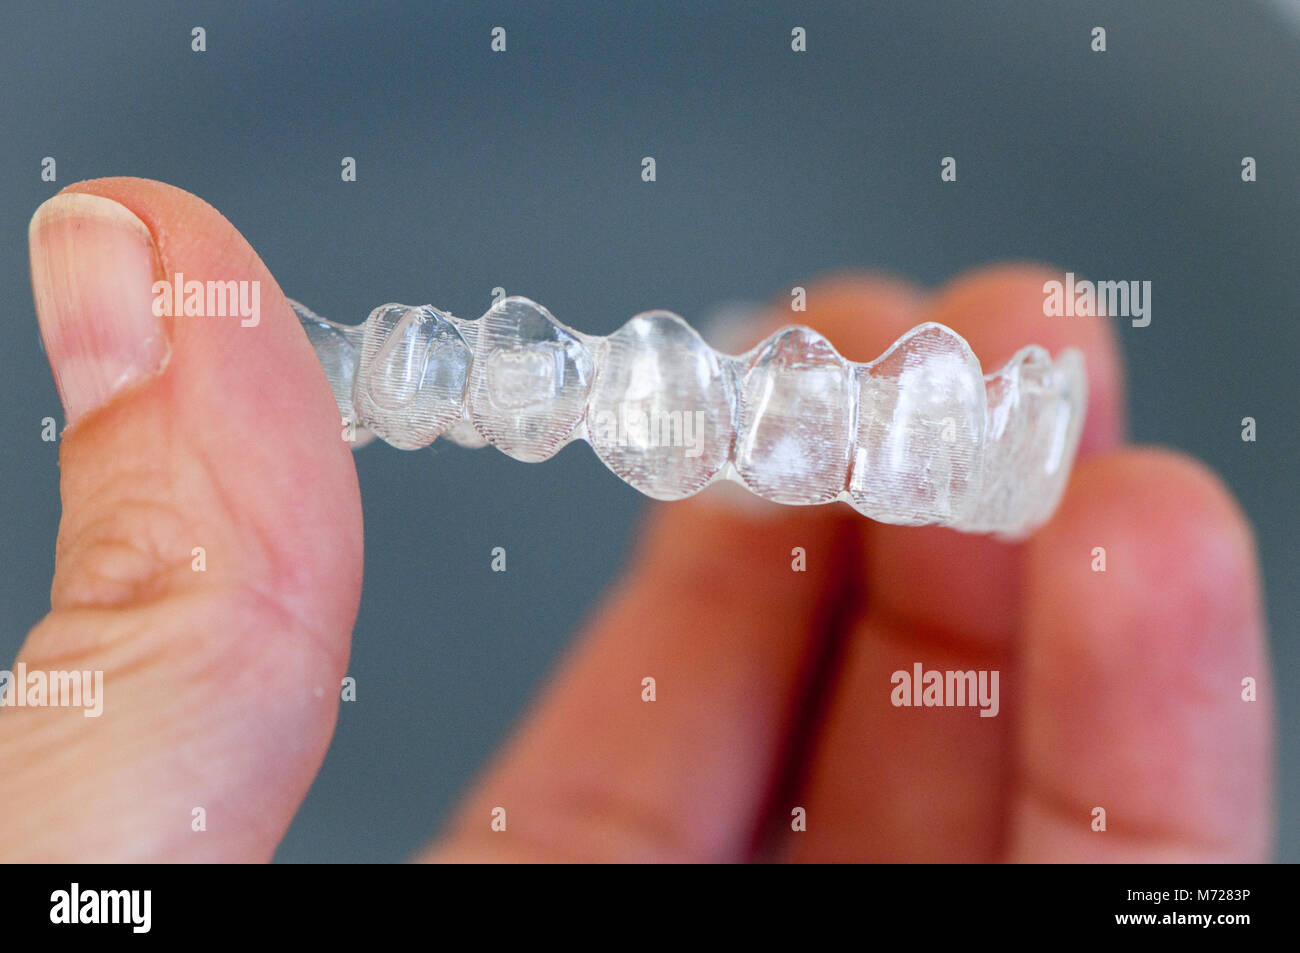 Hand holding invisible, plastic tooth brackets (orthodontic aligners) Stock Photo